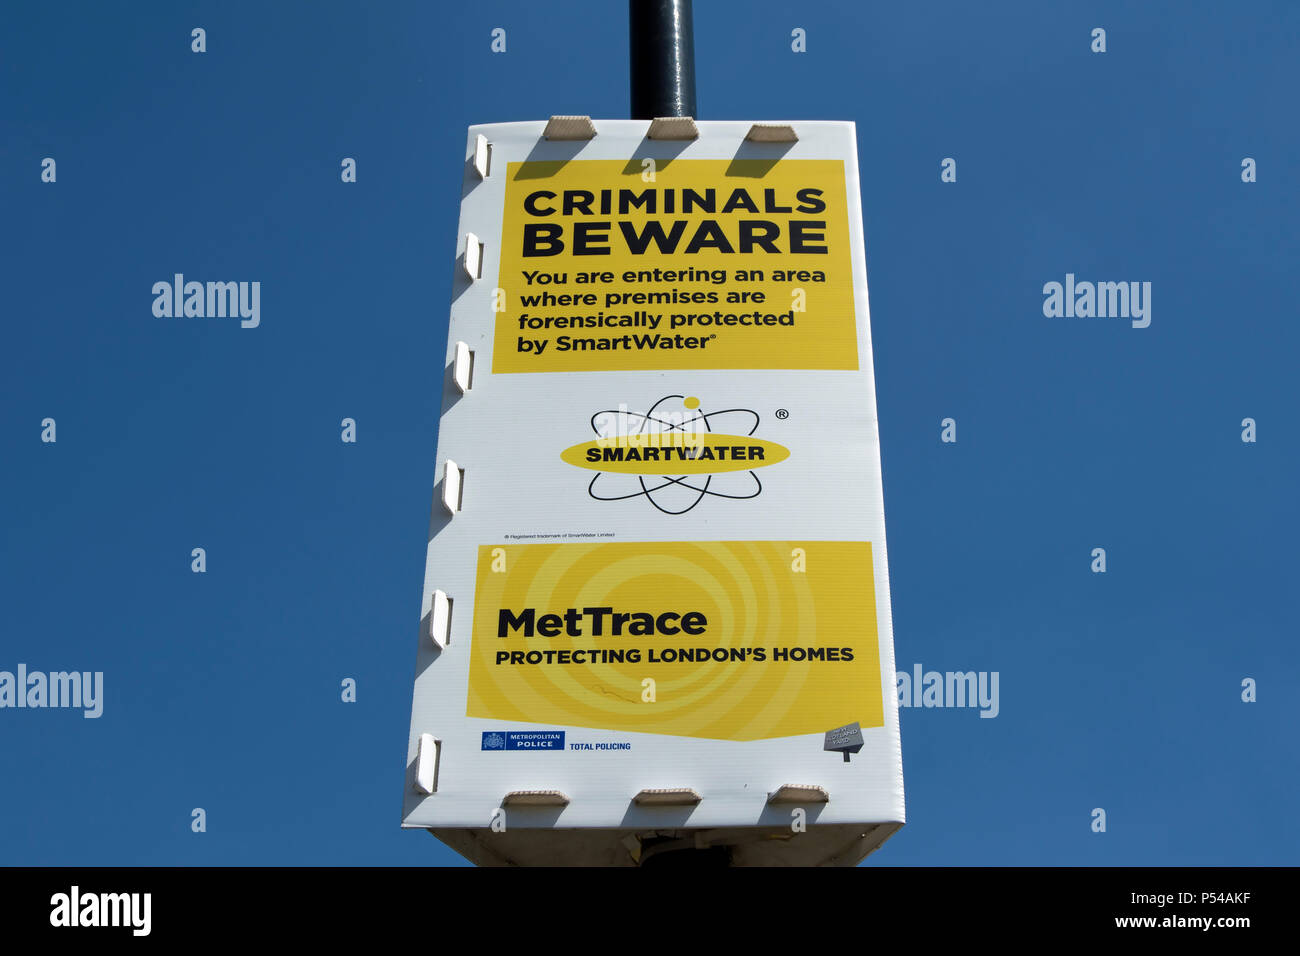 metropolitian police criminals beware sign, promoting mettrace and sweetwater initiatives to combat burglaries, in chiswick, london, england Stock Photo